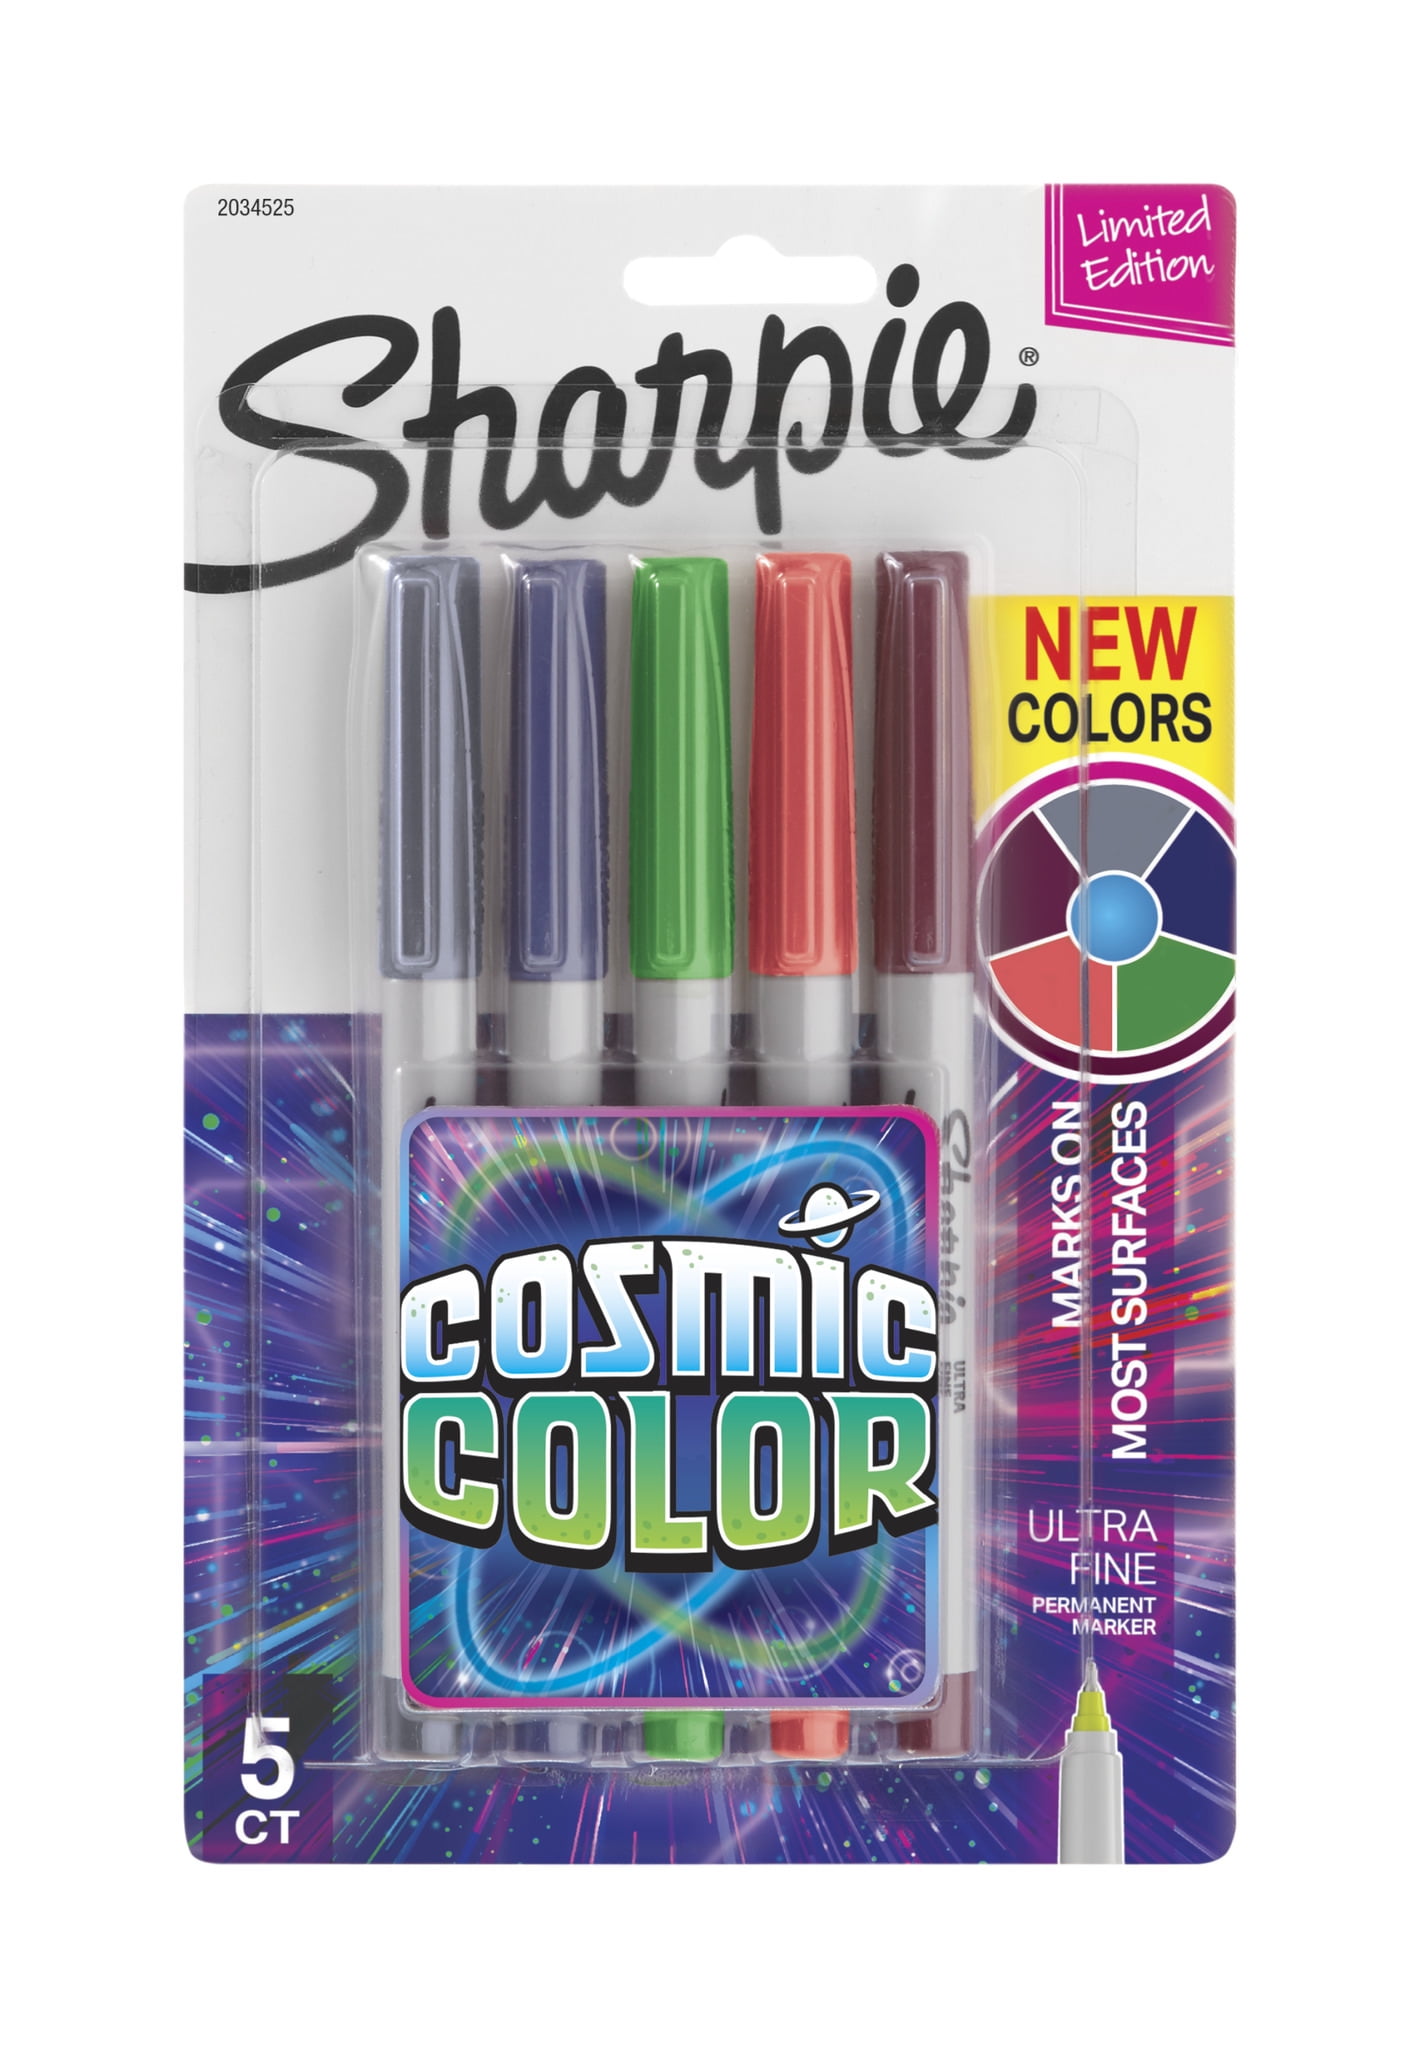 10 total Lot of 2 Sharpie Cosmic Color Classic Fine & Ultra Fine 5 pack each 